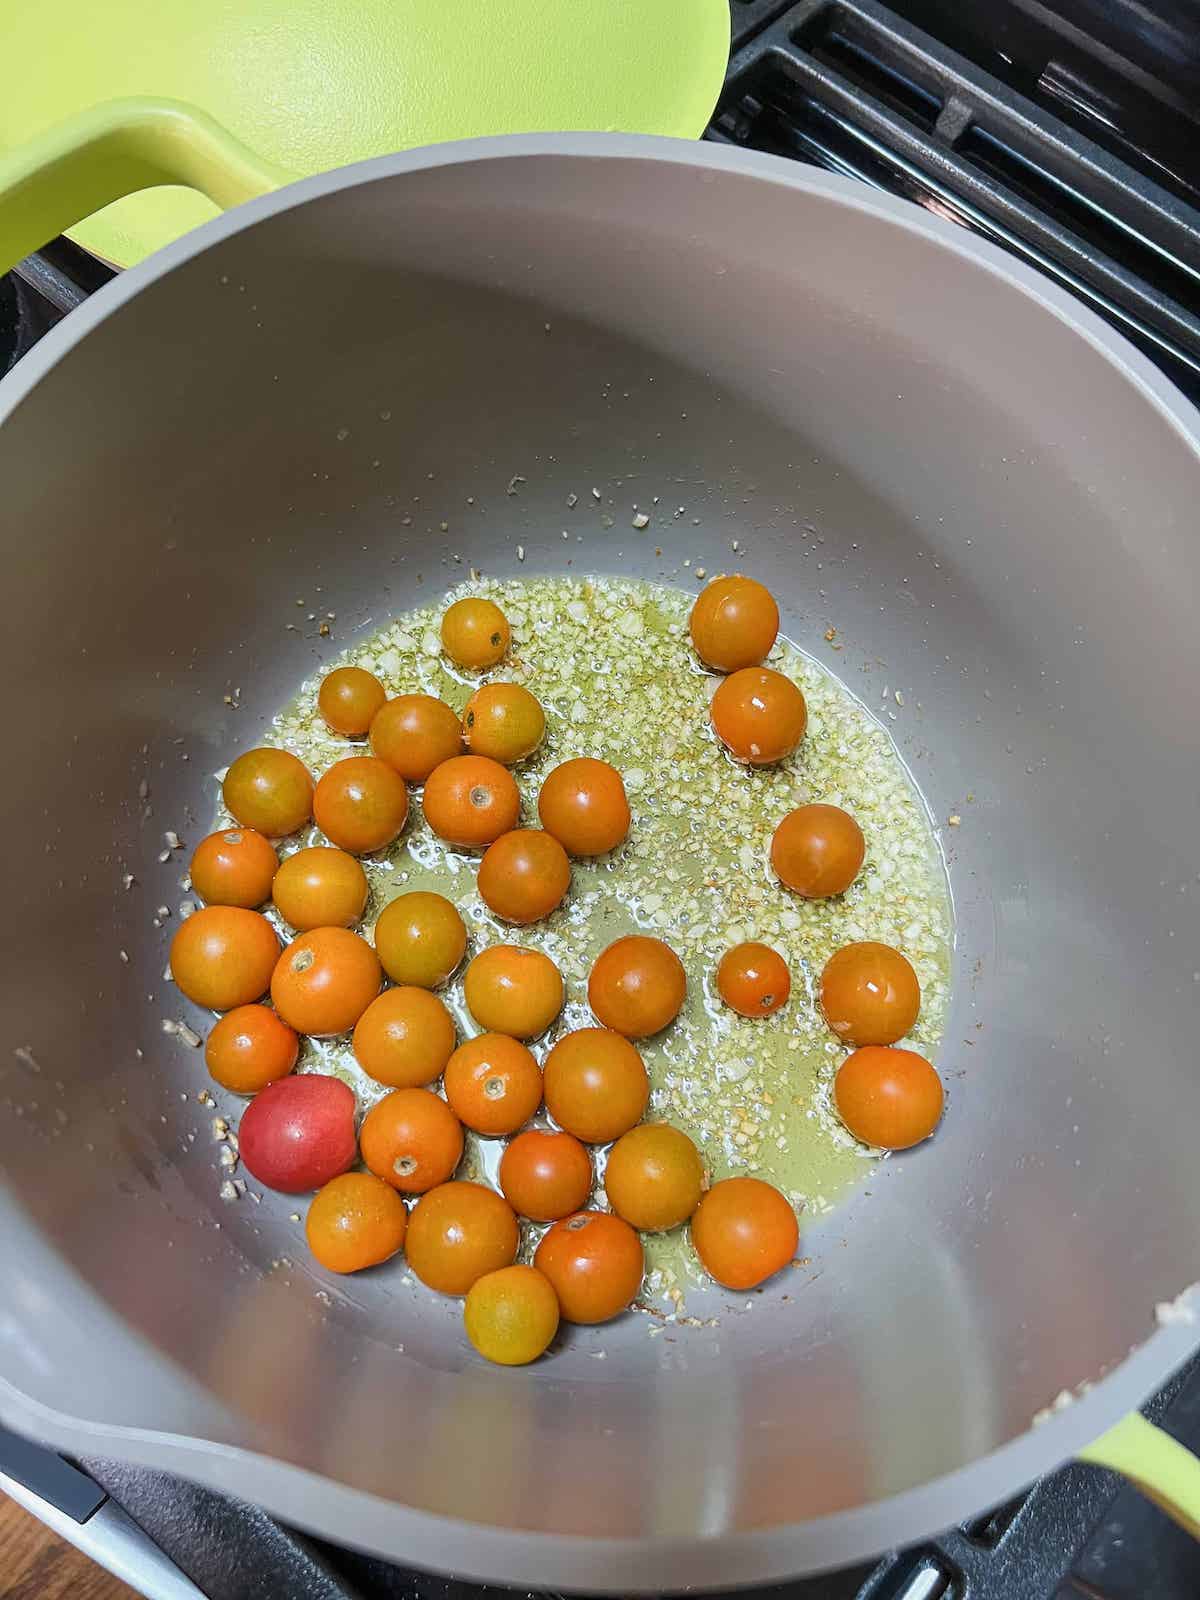 Pot with olive oil, garlic, shallots and whole sungold cherry tomatoes.